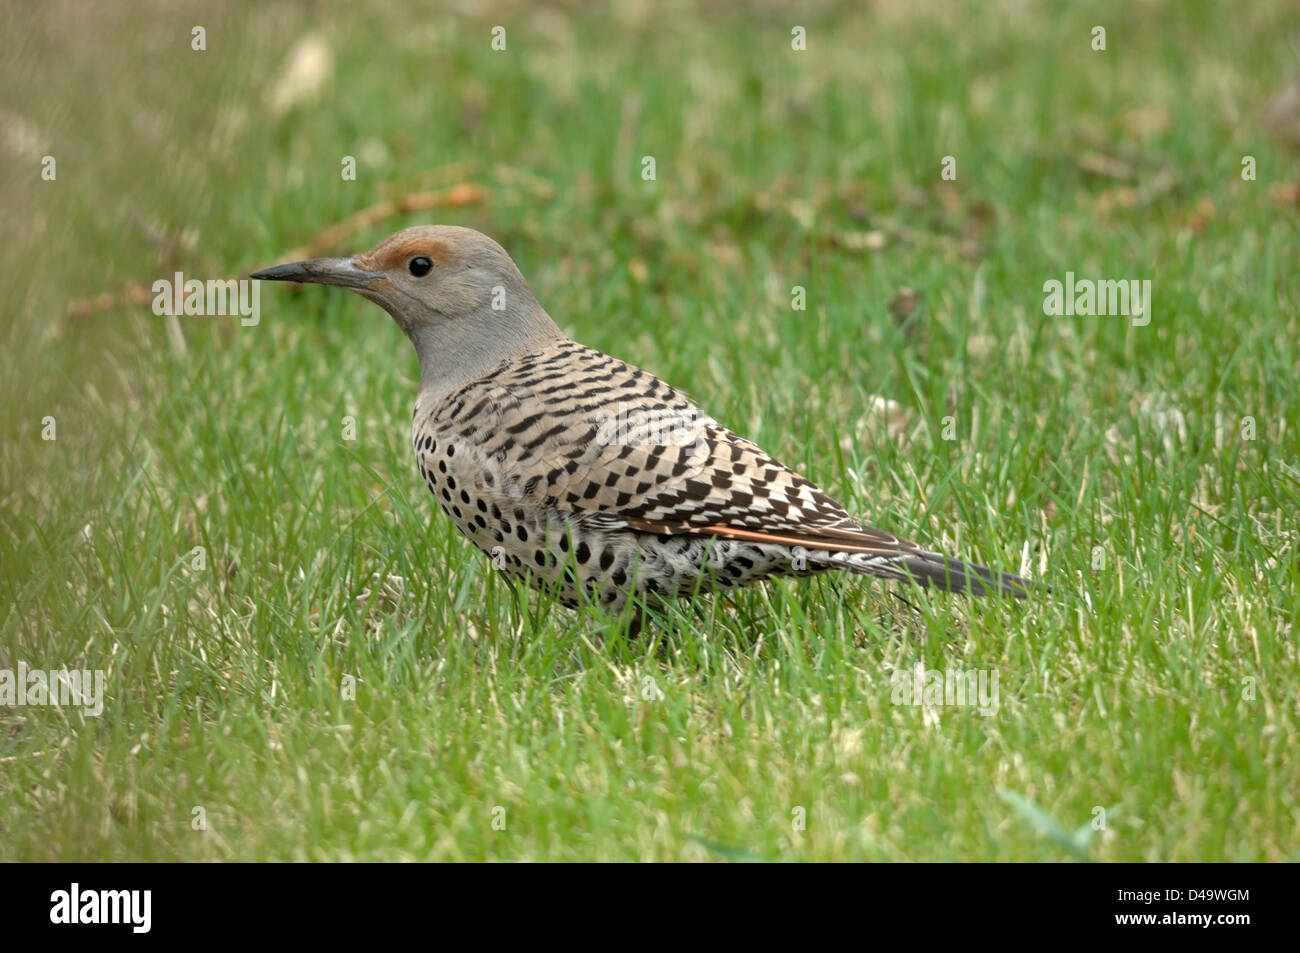 A female Northern Flicker (Colaptes auratus) sitting on grass during summer. Stock Photo